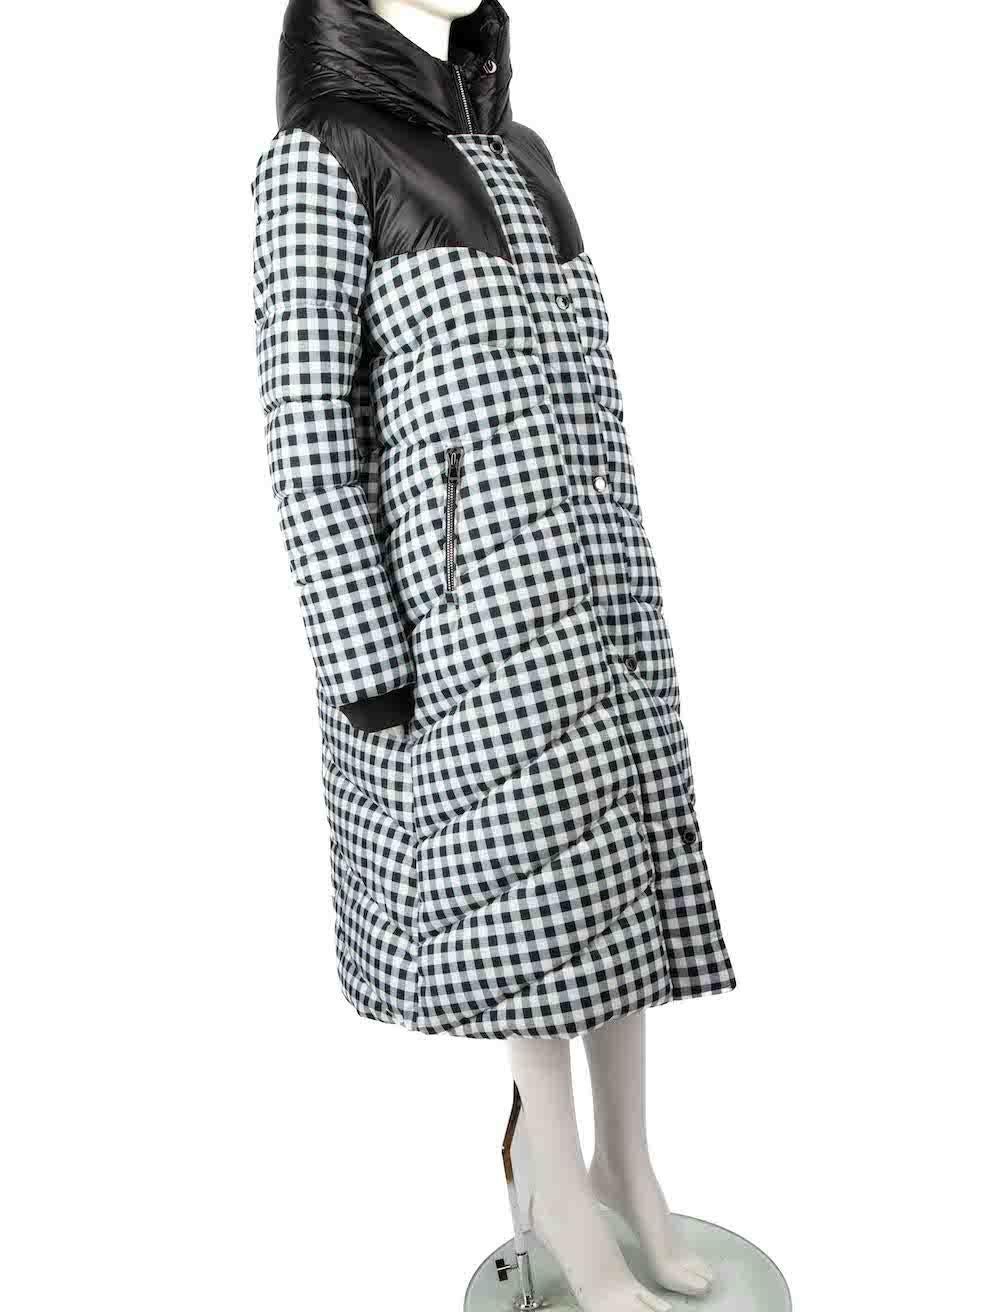 CONDITION is Very good. Minimal wear to coat is evident. Minimal discolouration to the left sleeve and on the bottom hemline on this used Barbour designer resale item.
 
 
 
 Details
 
 
 Black and white
 
 Polyester
 
 Puffer coat
 
 Gingham